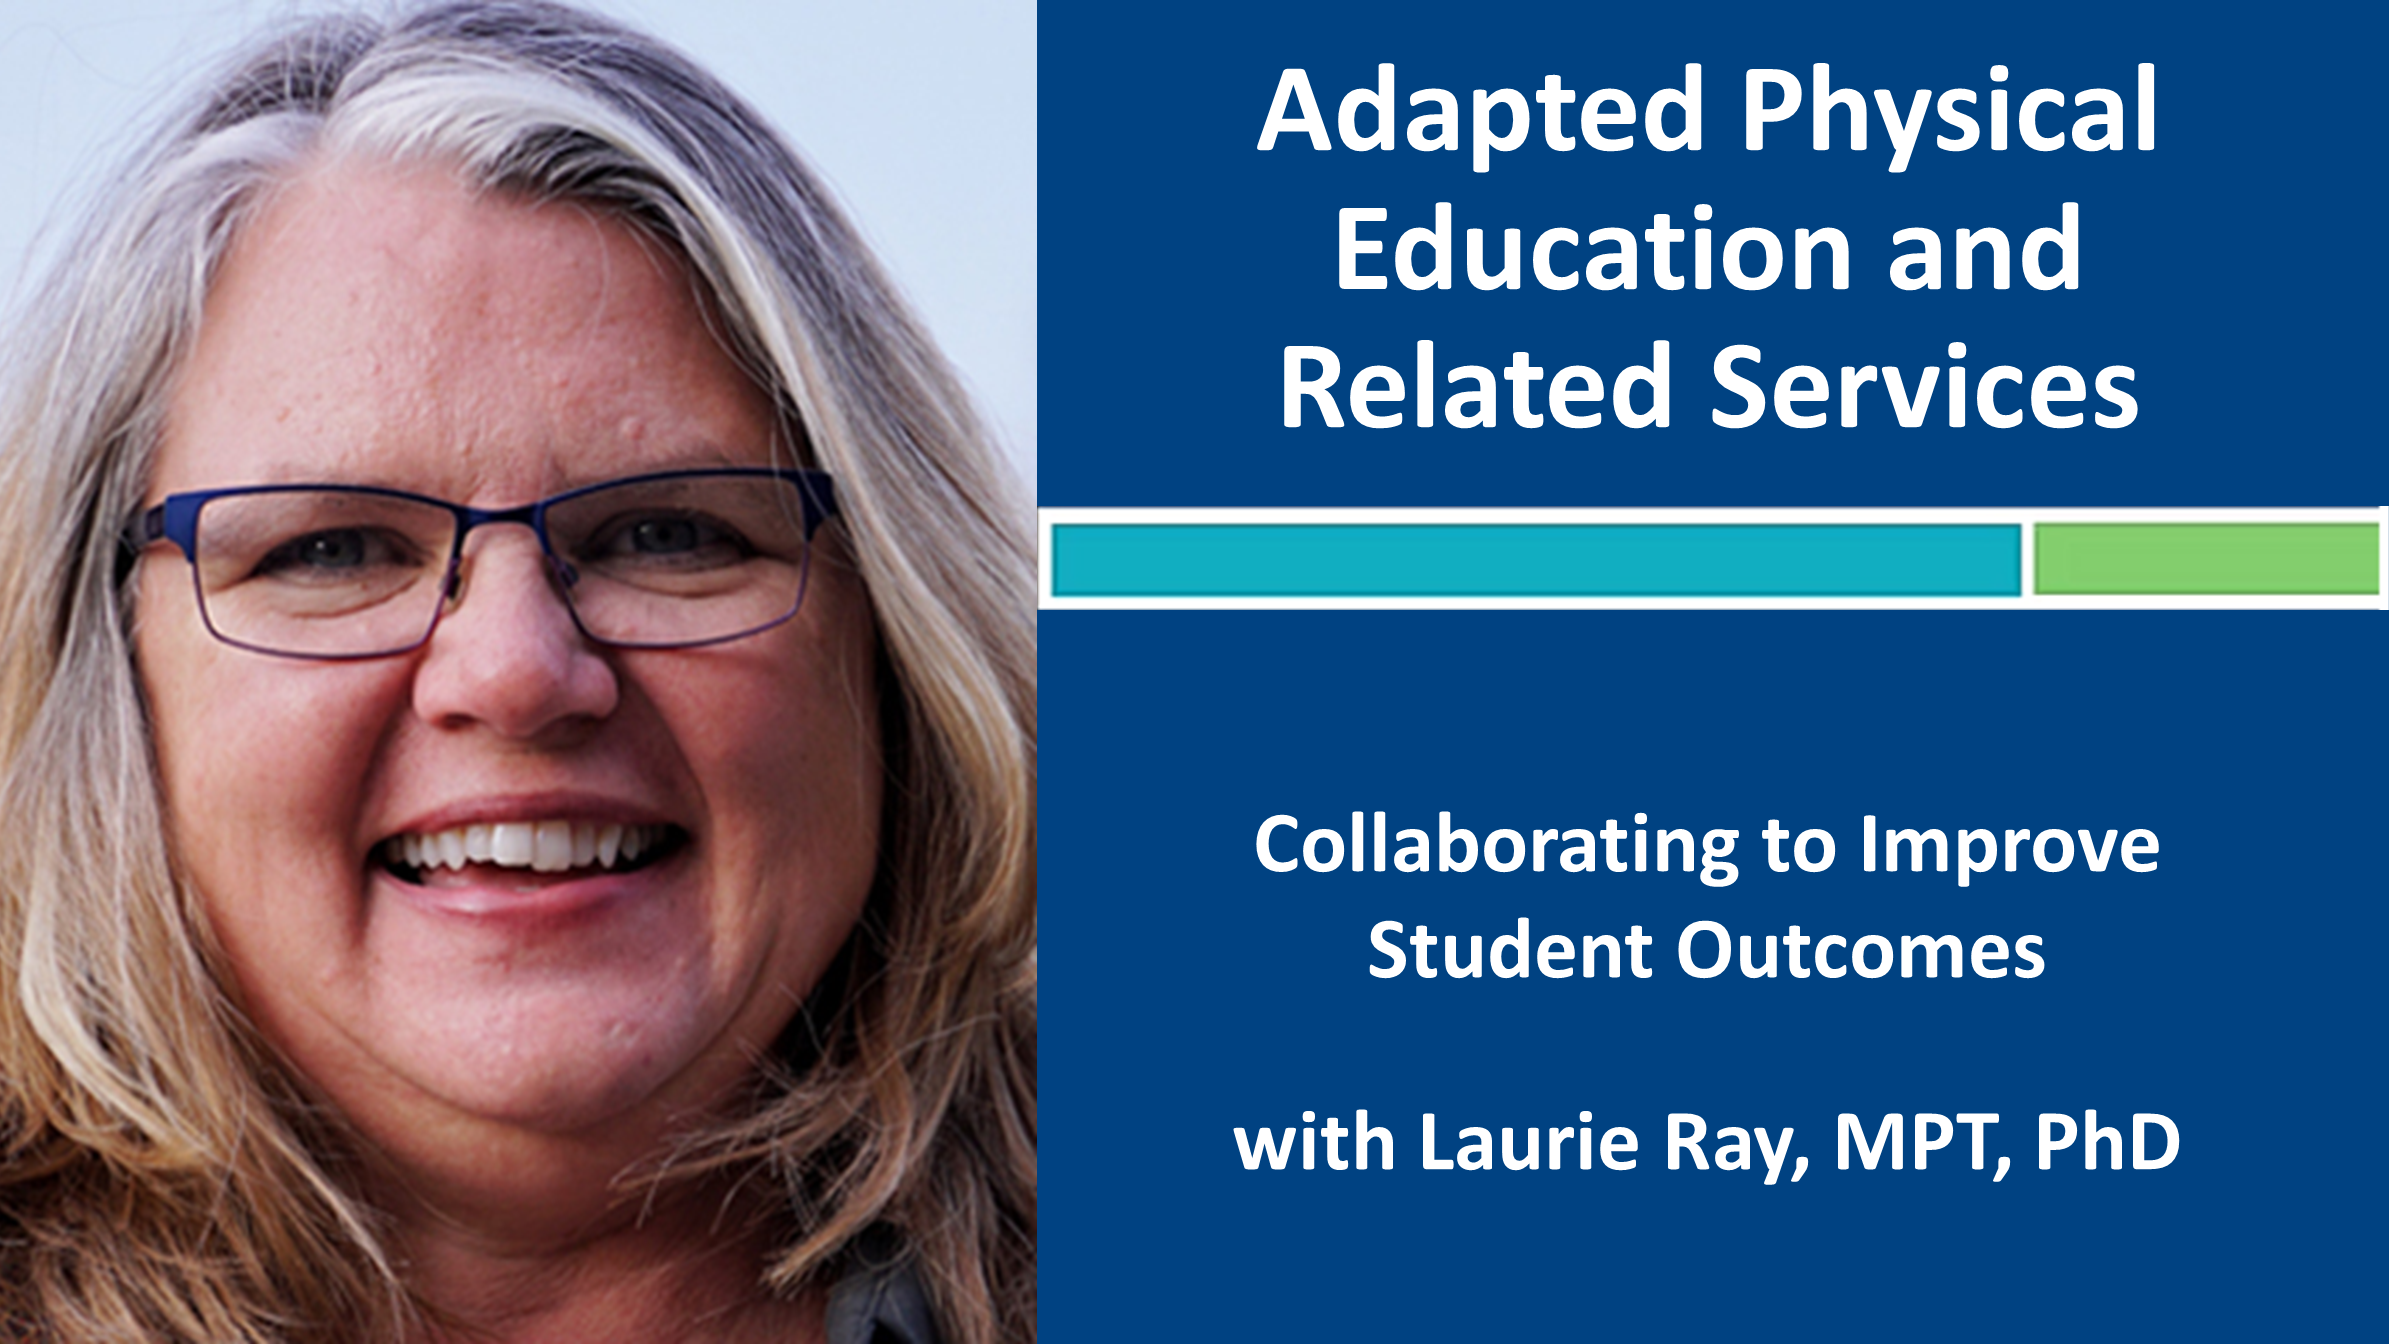 Webinar 7: APE and Related Services with Laurie Ray, MPT, PhD